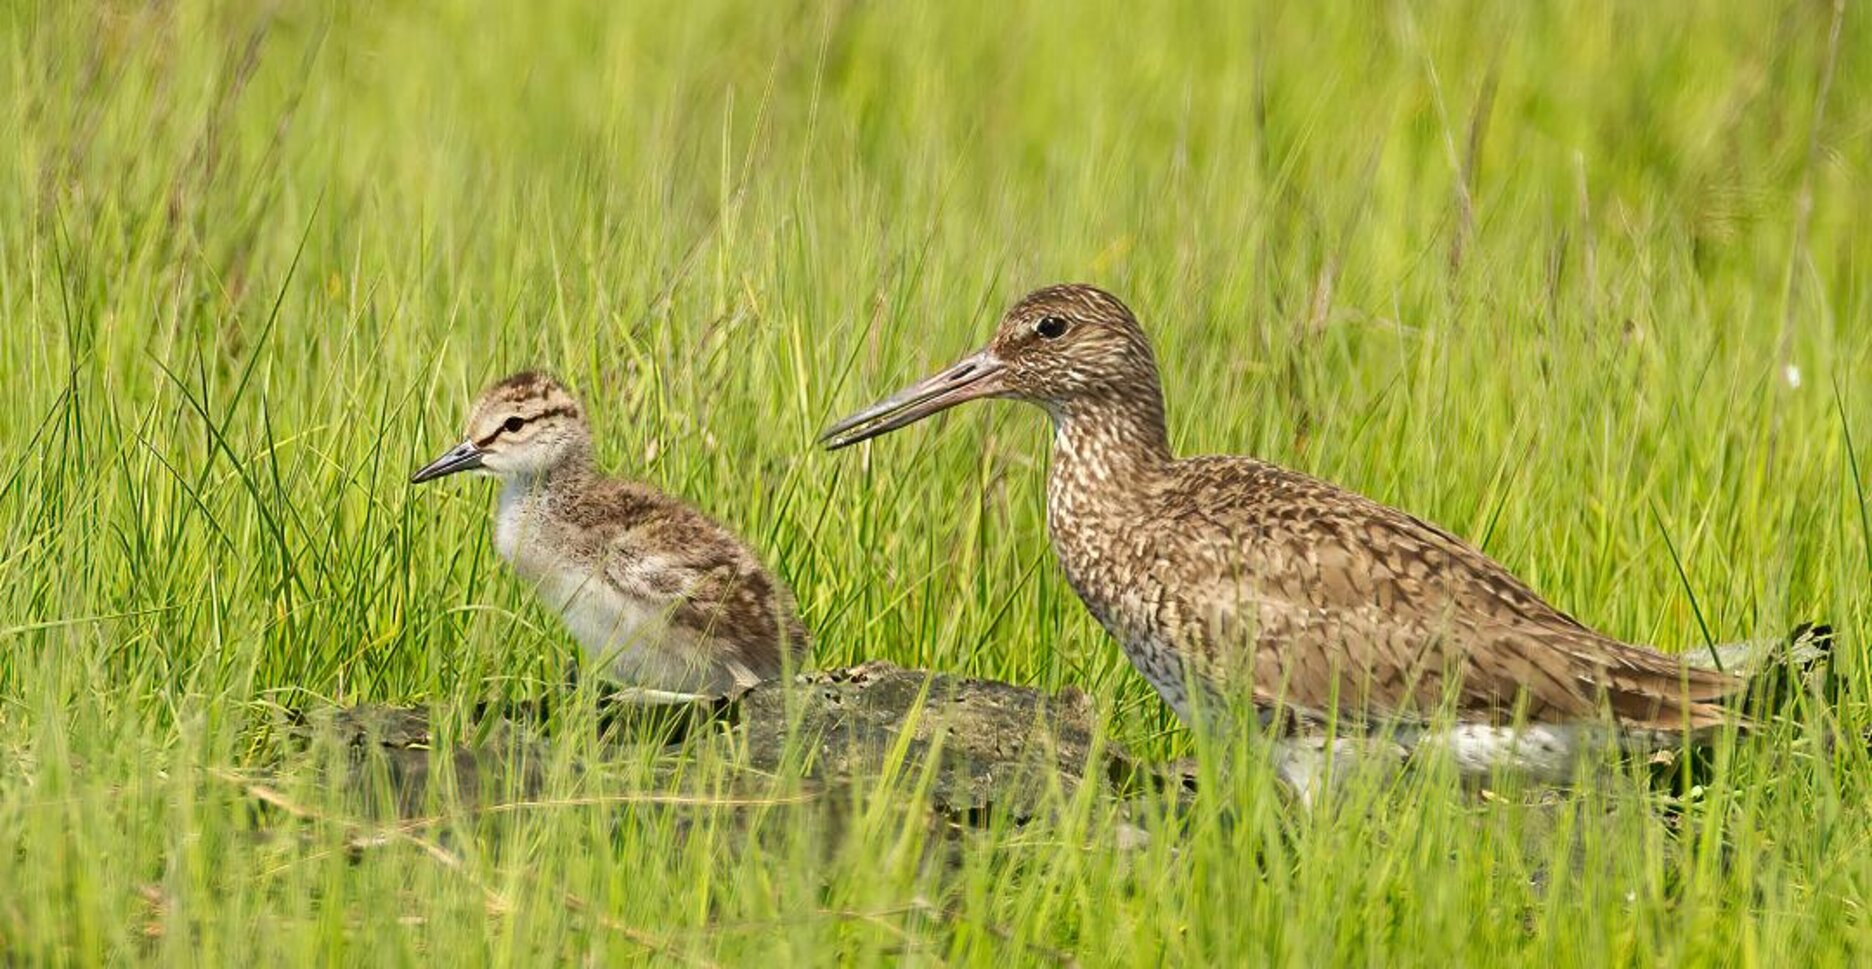 An adult Willet with a days-old chick. Willet chicks are “precocial and nidifugous,” meaning that at hatching they are covered with down, able to feed themselves, and able to leave the nest. Photo: <a href="https://pbase.com/btblue" target="_blank">Lloyd Spitalnik</a>